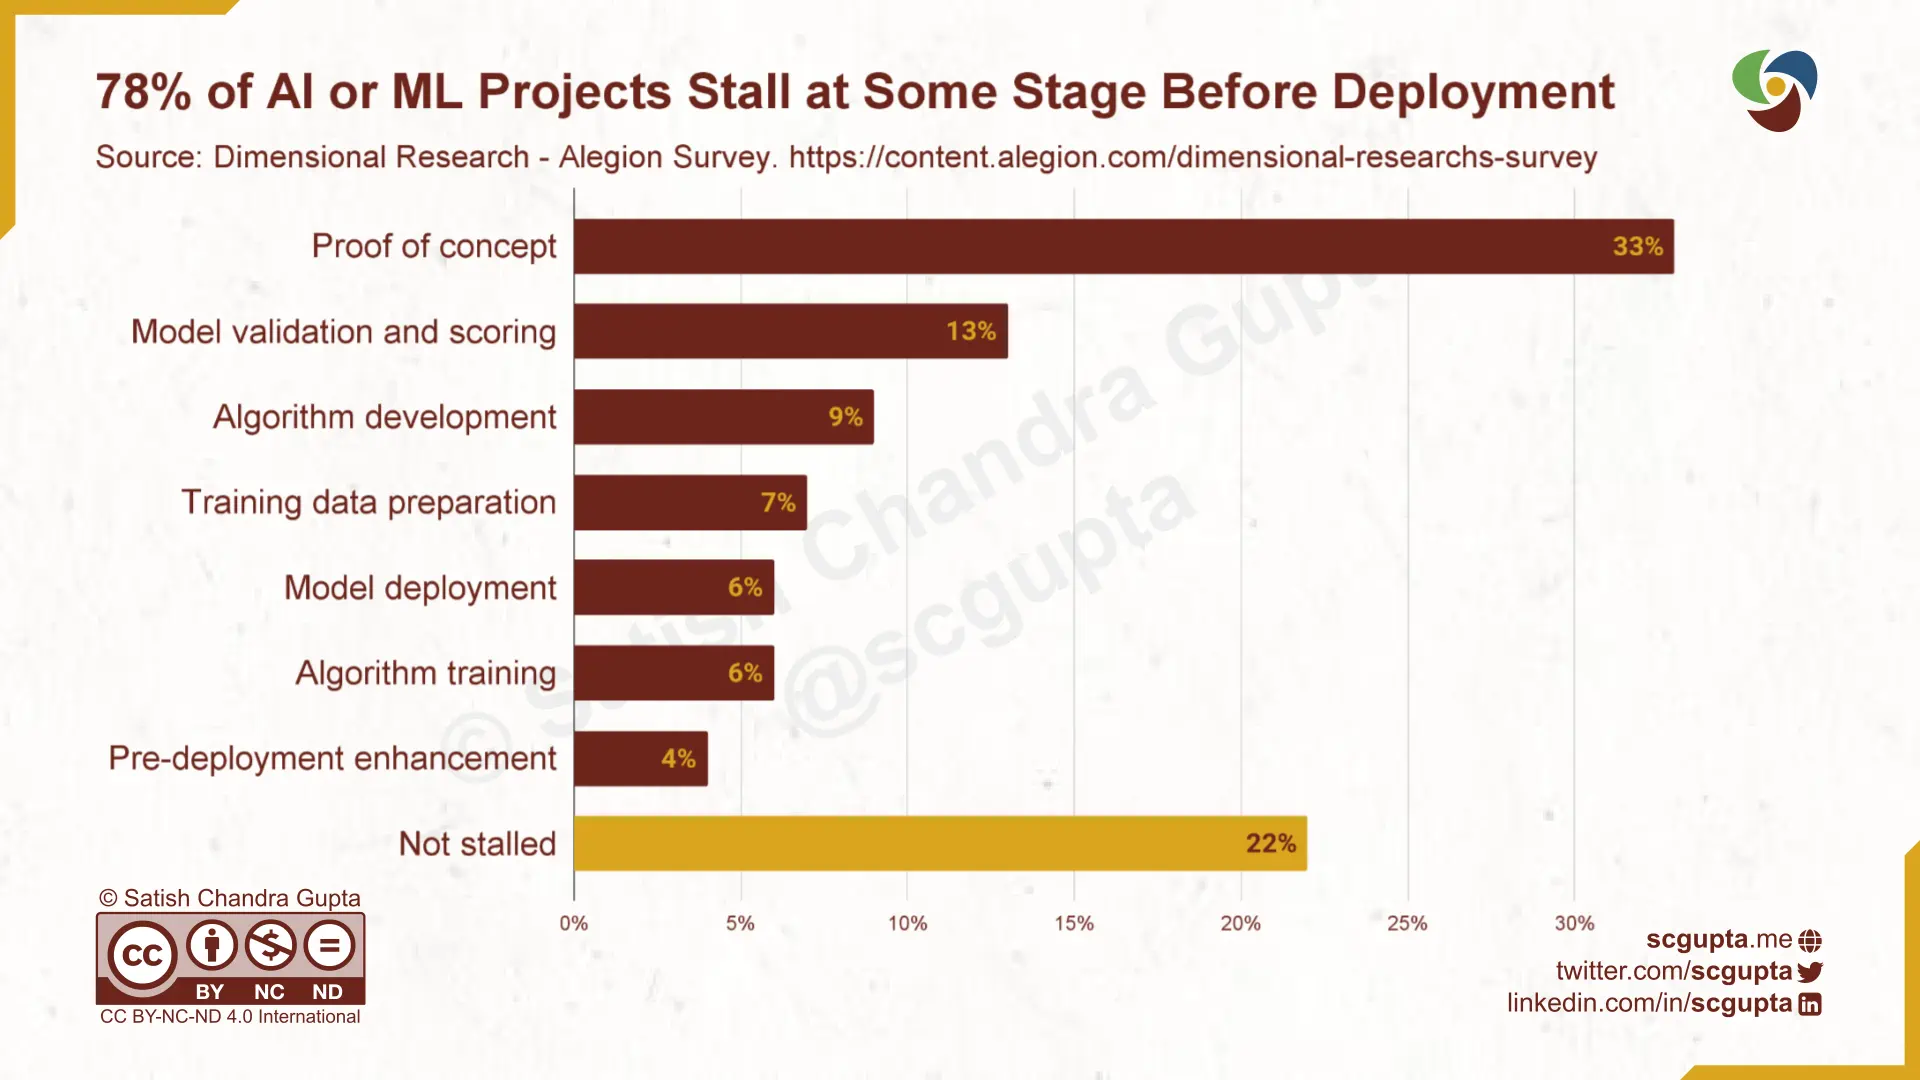 78% of ML projects stall at some stage before deployment